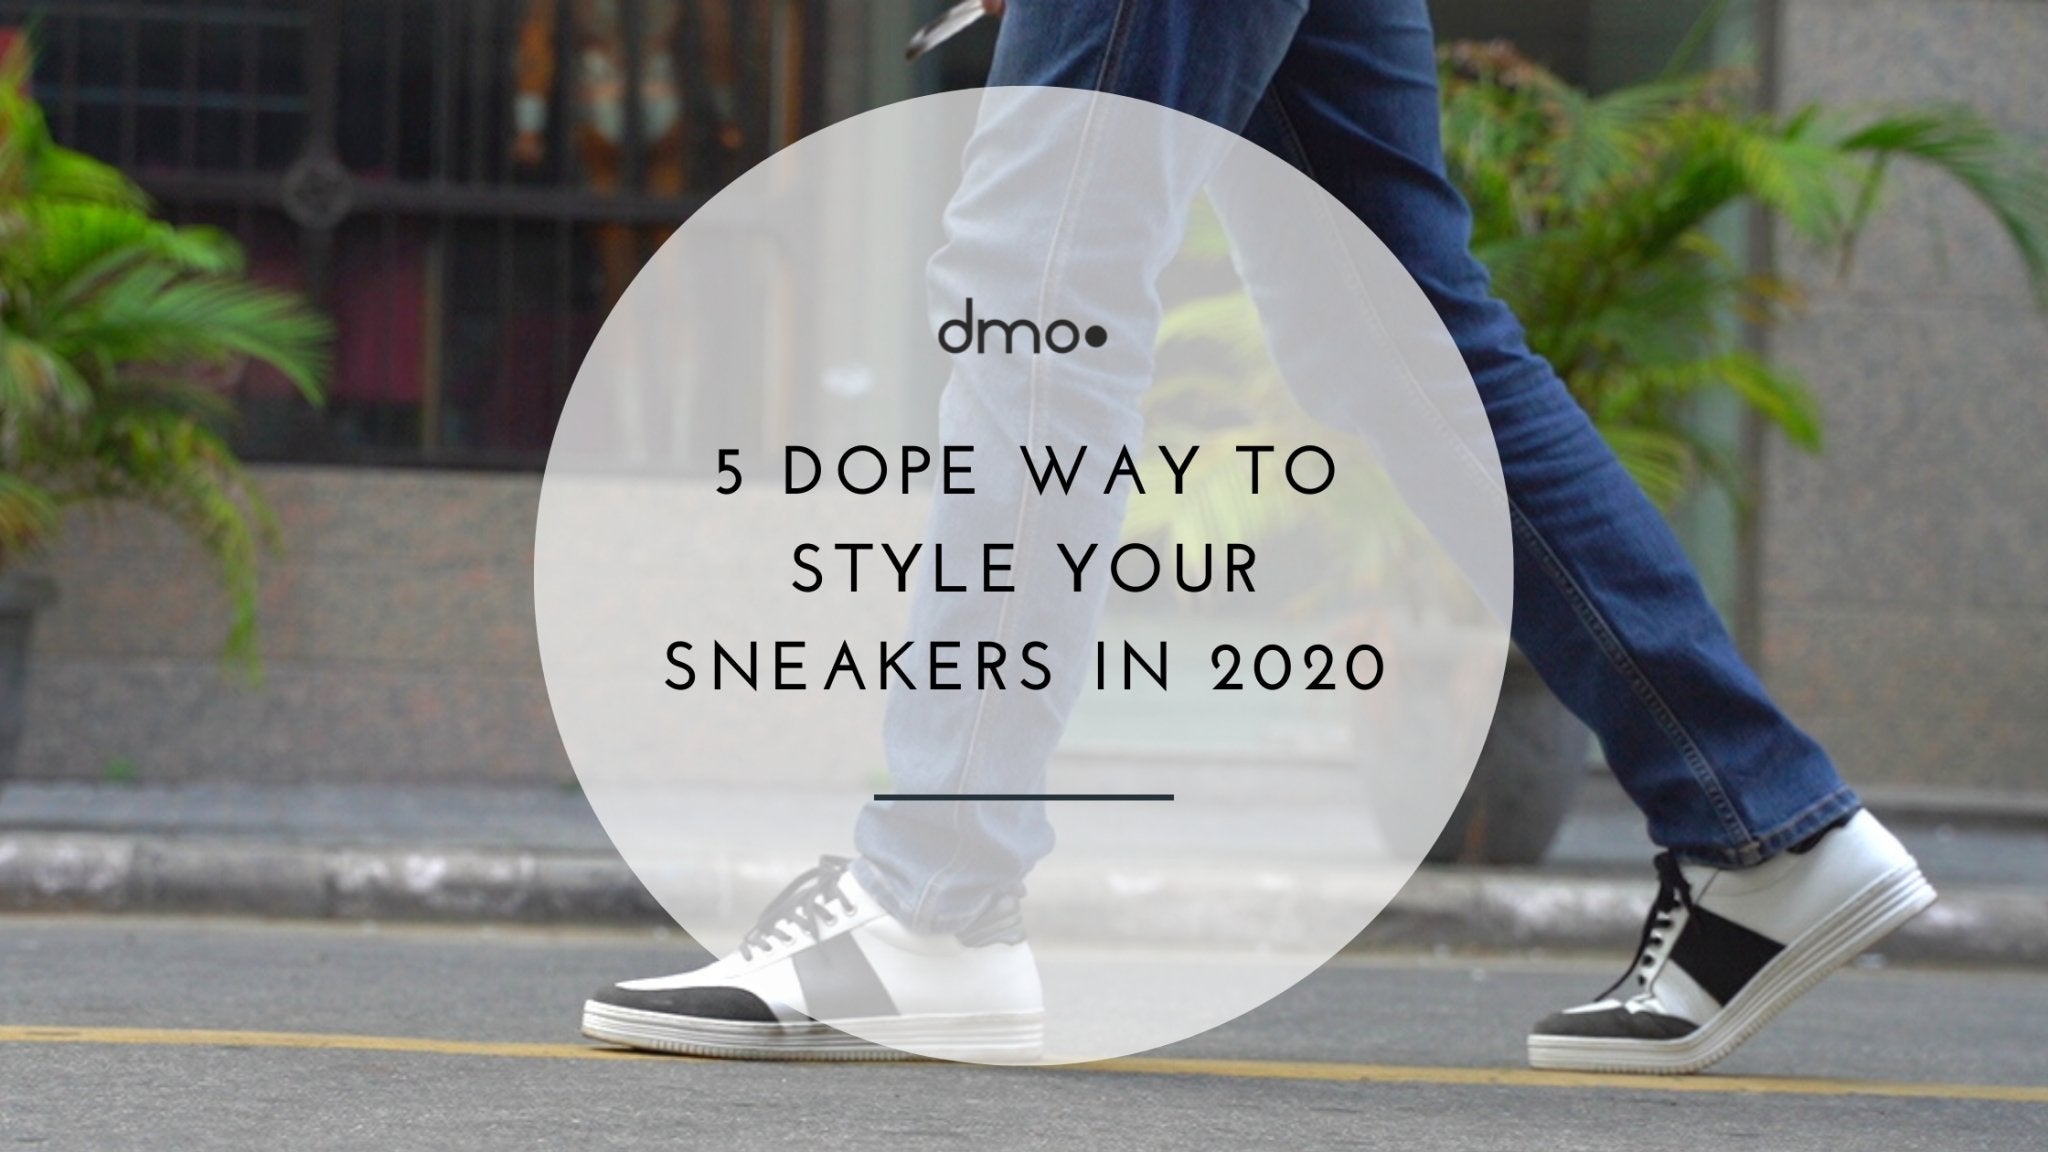 5 Dope Way to Style Your Sneakers in 2020 - dmodot Shoes